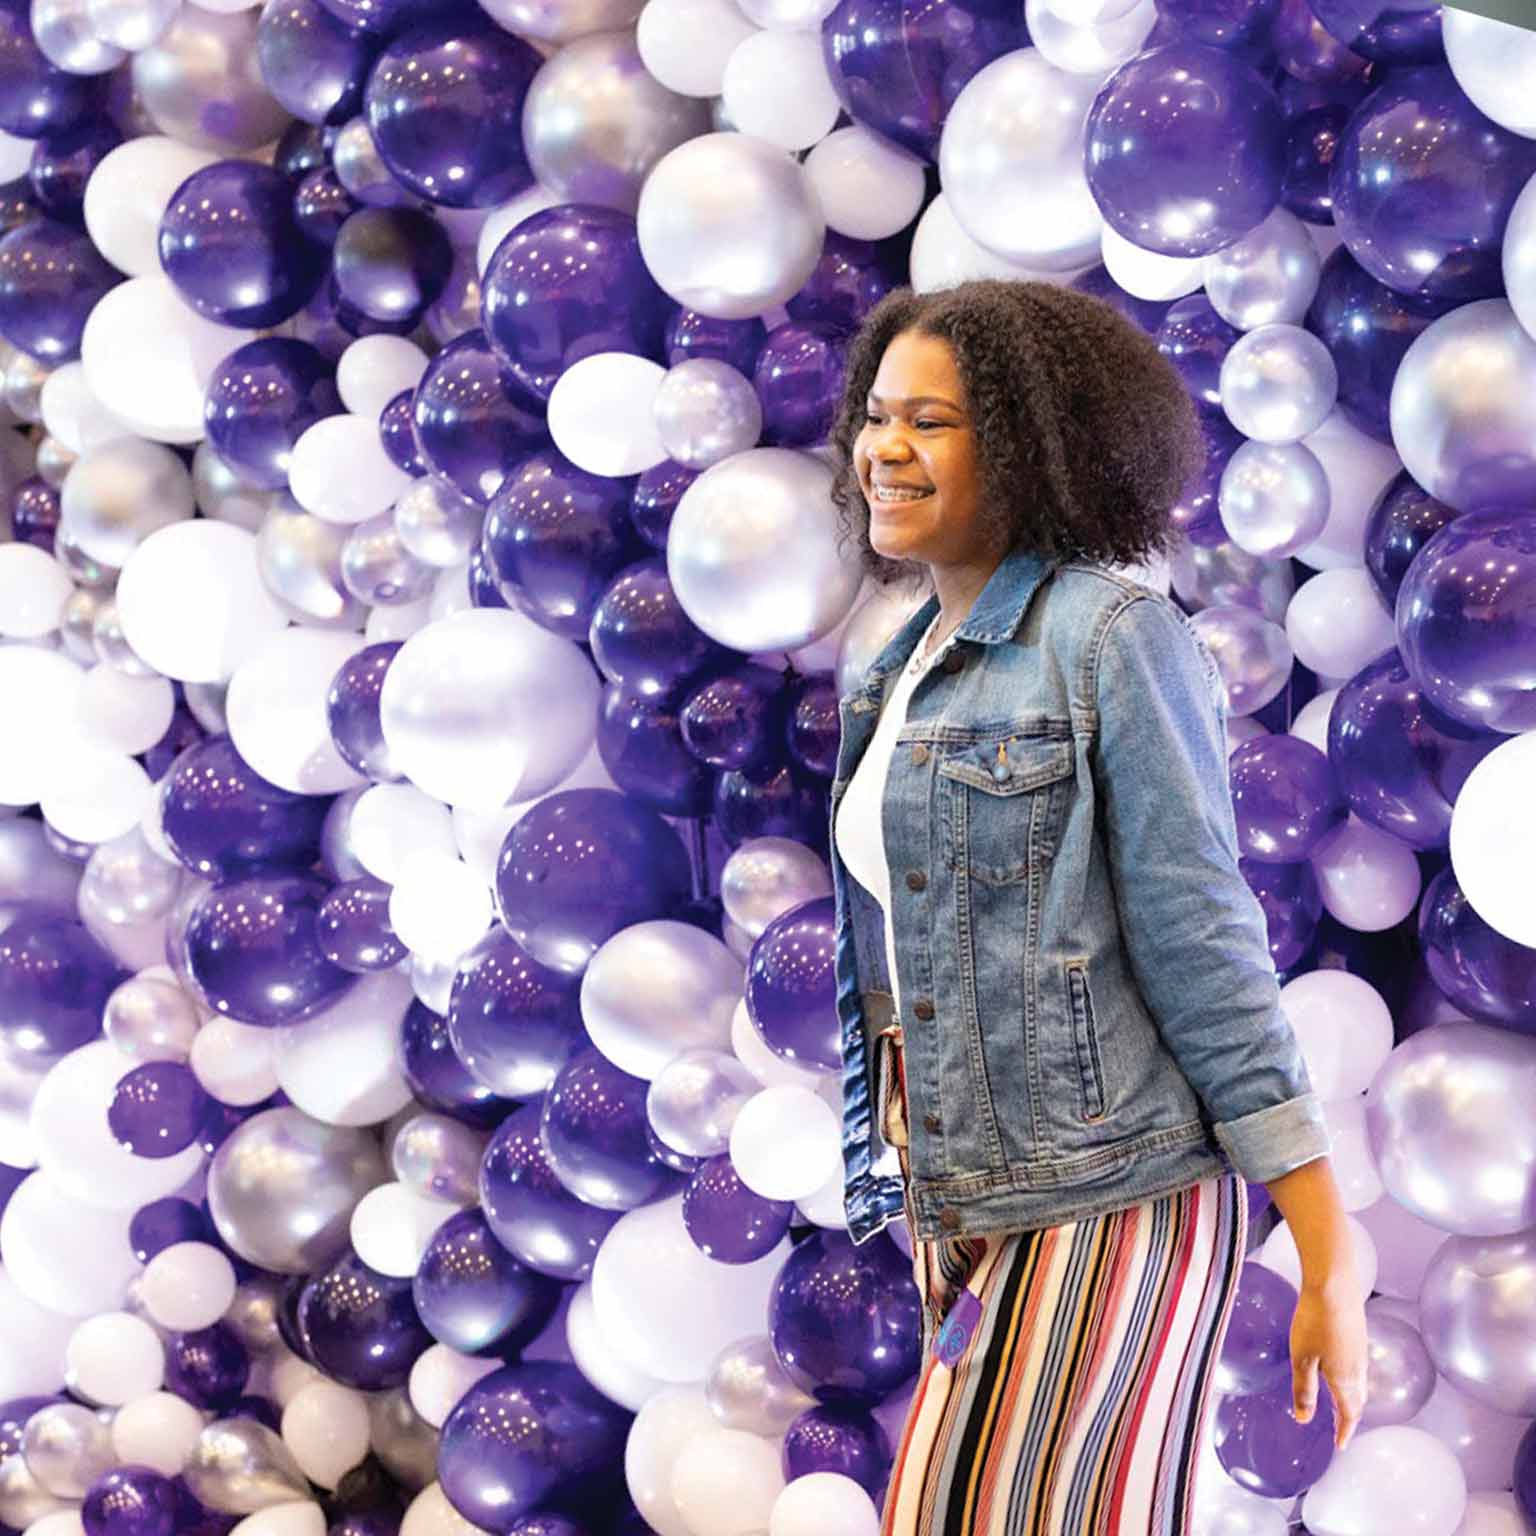 An NYU admitted student standing by a violet and white balloon wall.